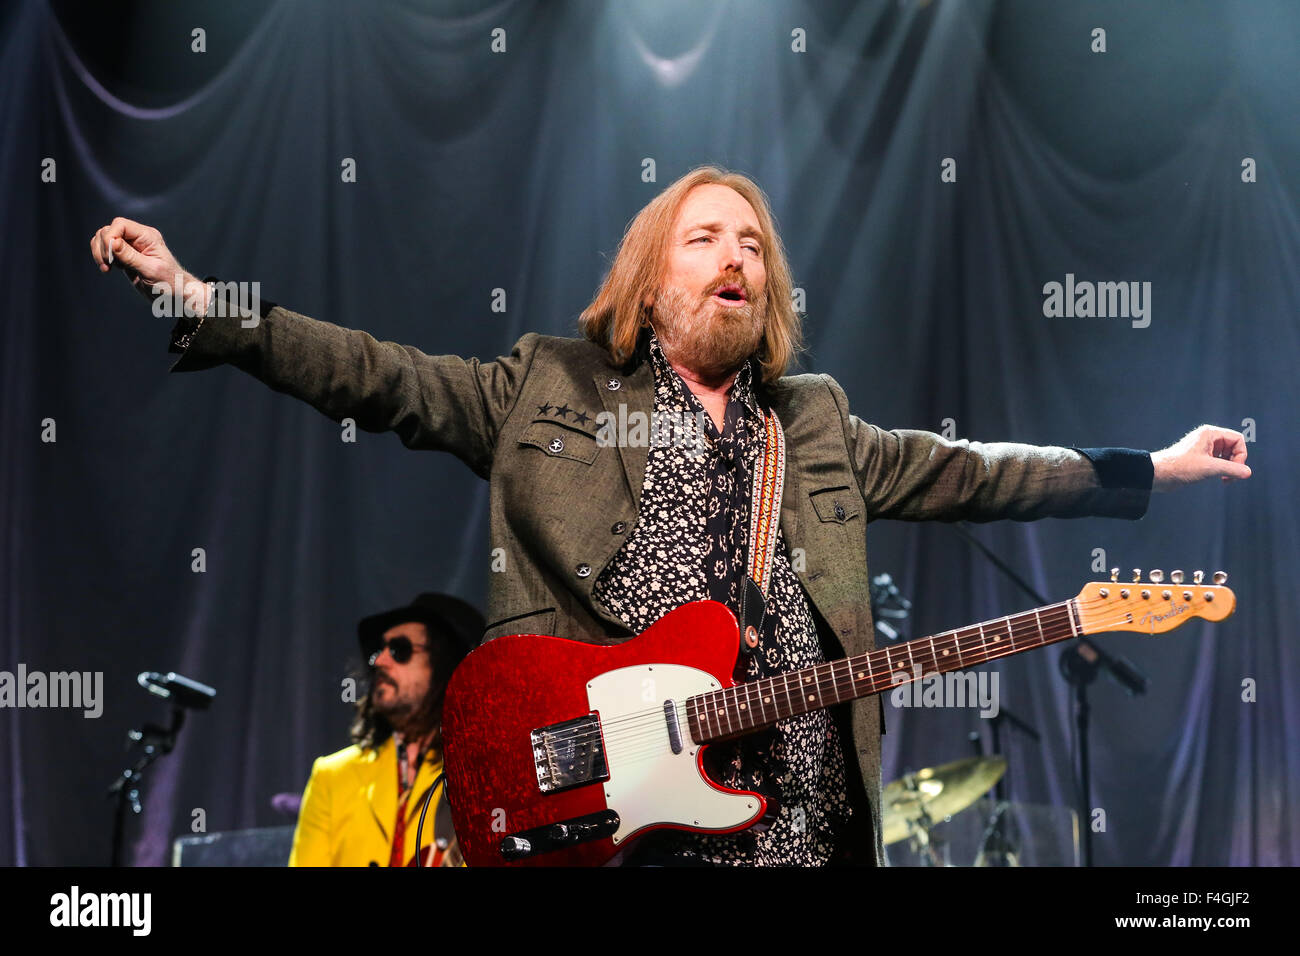 Music artist TOM PETTY & THE HEARTBREAKERS bring their 2014 Summer Tour to Raleigh, NC.  Tom Petty and the Heartbreakers is an American rock band from Gainesville, Florida. Stock Photo